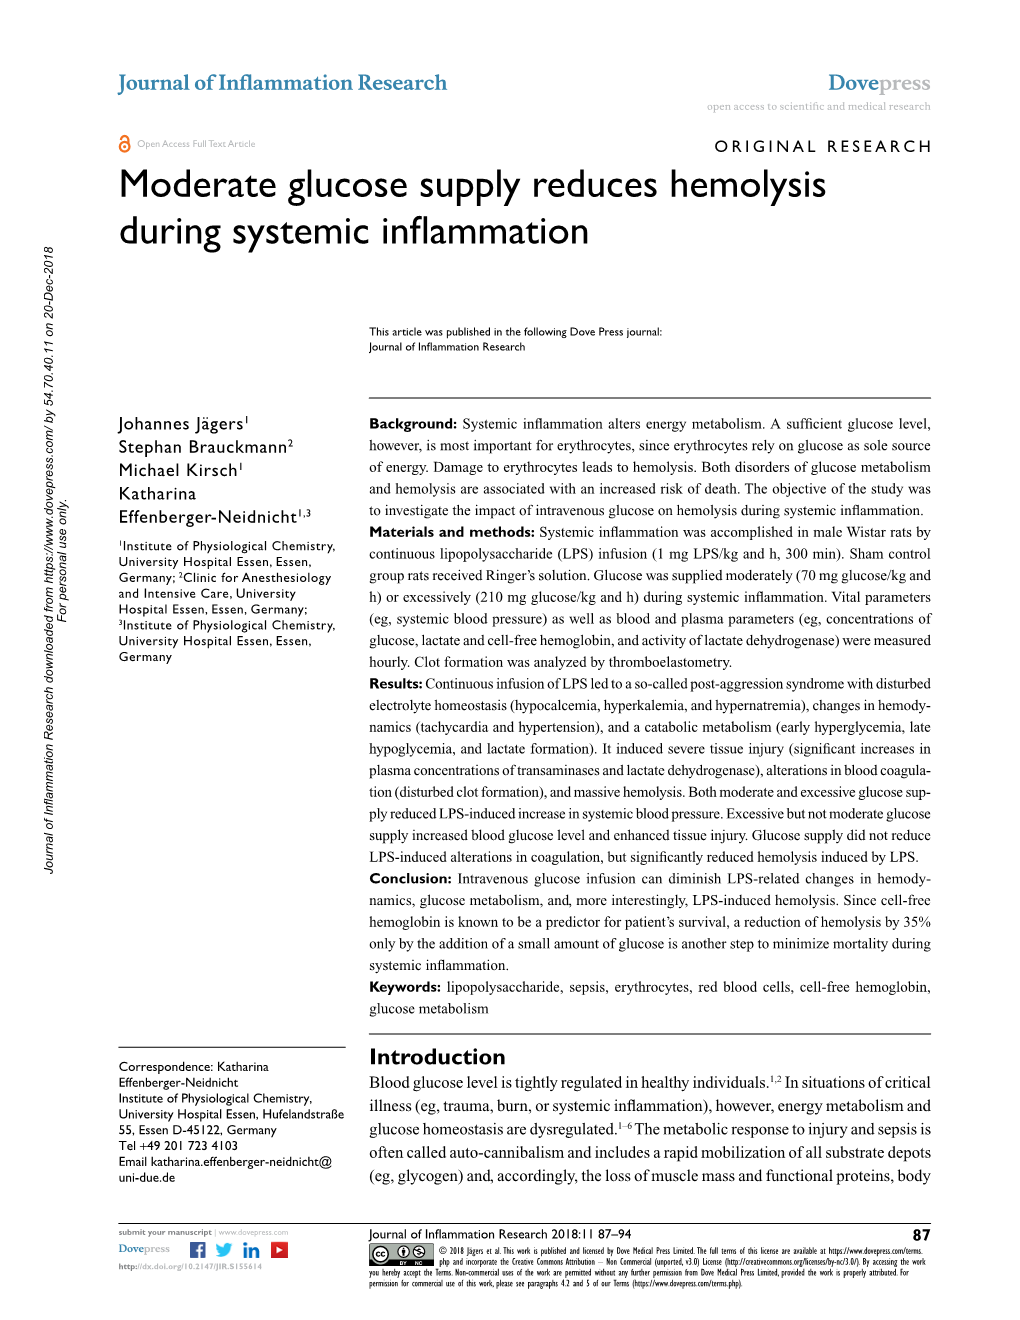 Moderate Glucose Supply Reduces Hemolysis During Systemic Inflammation